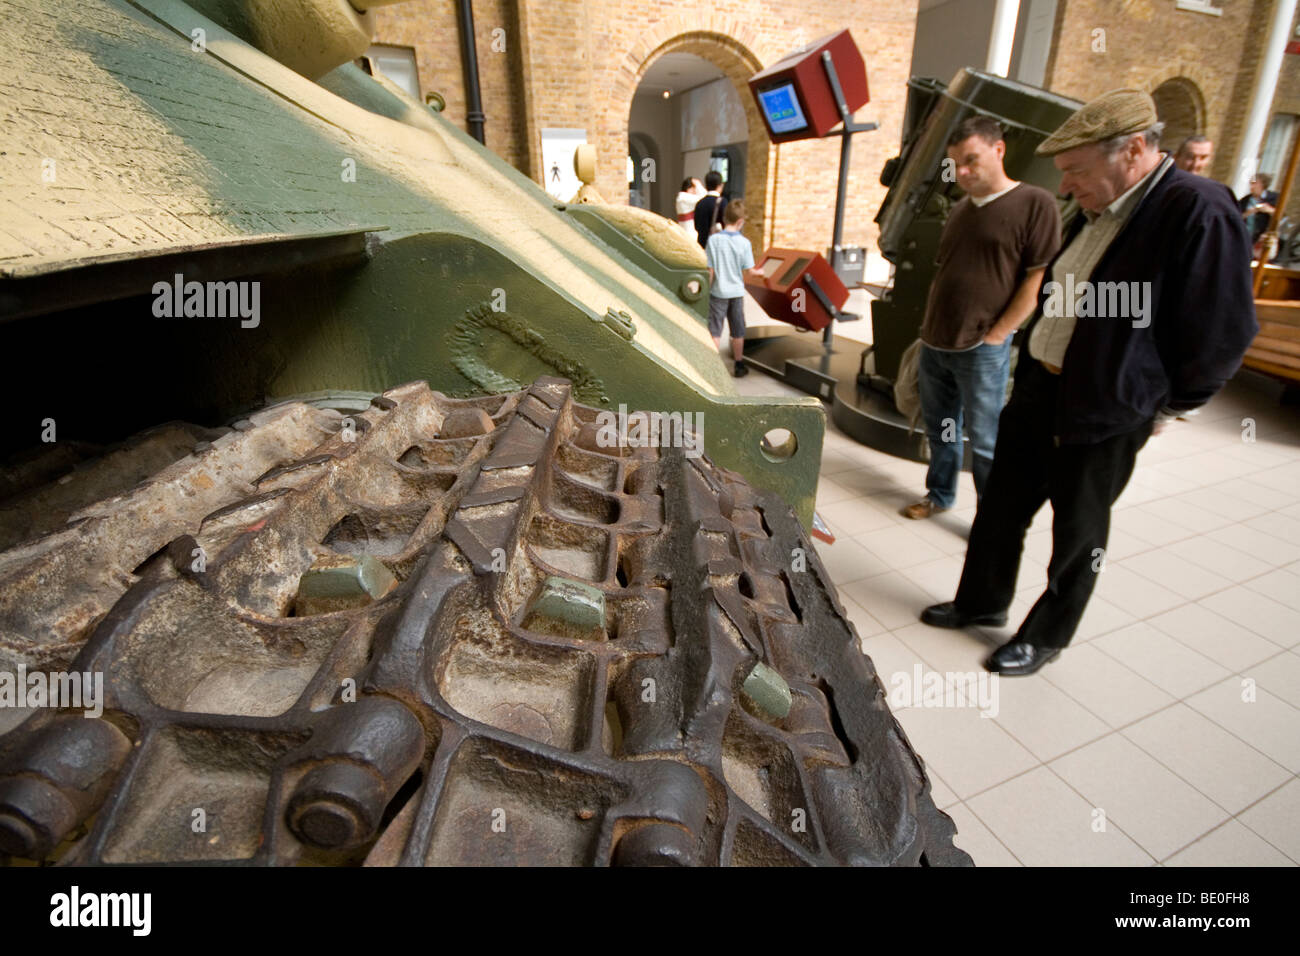 German Jagdpanther tank buster in The Imperial War Museum, Lambeth London, England. Stock Photo